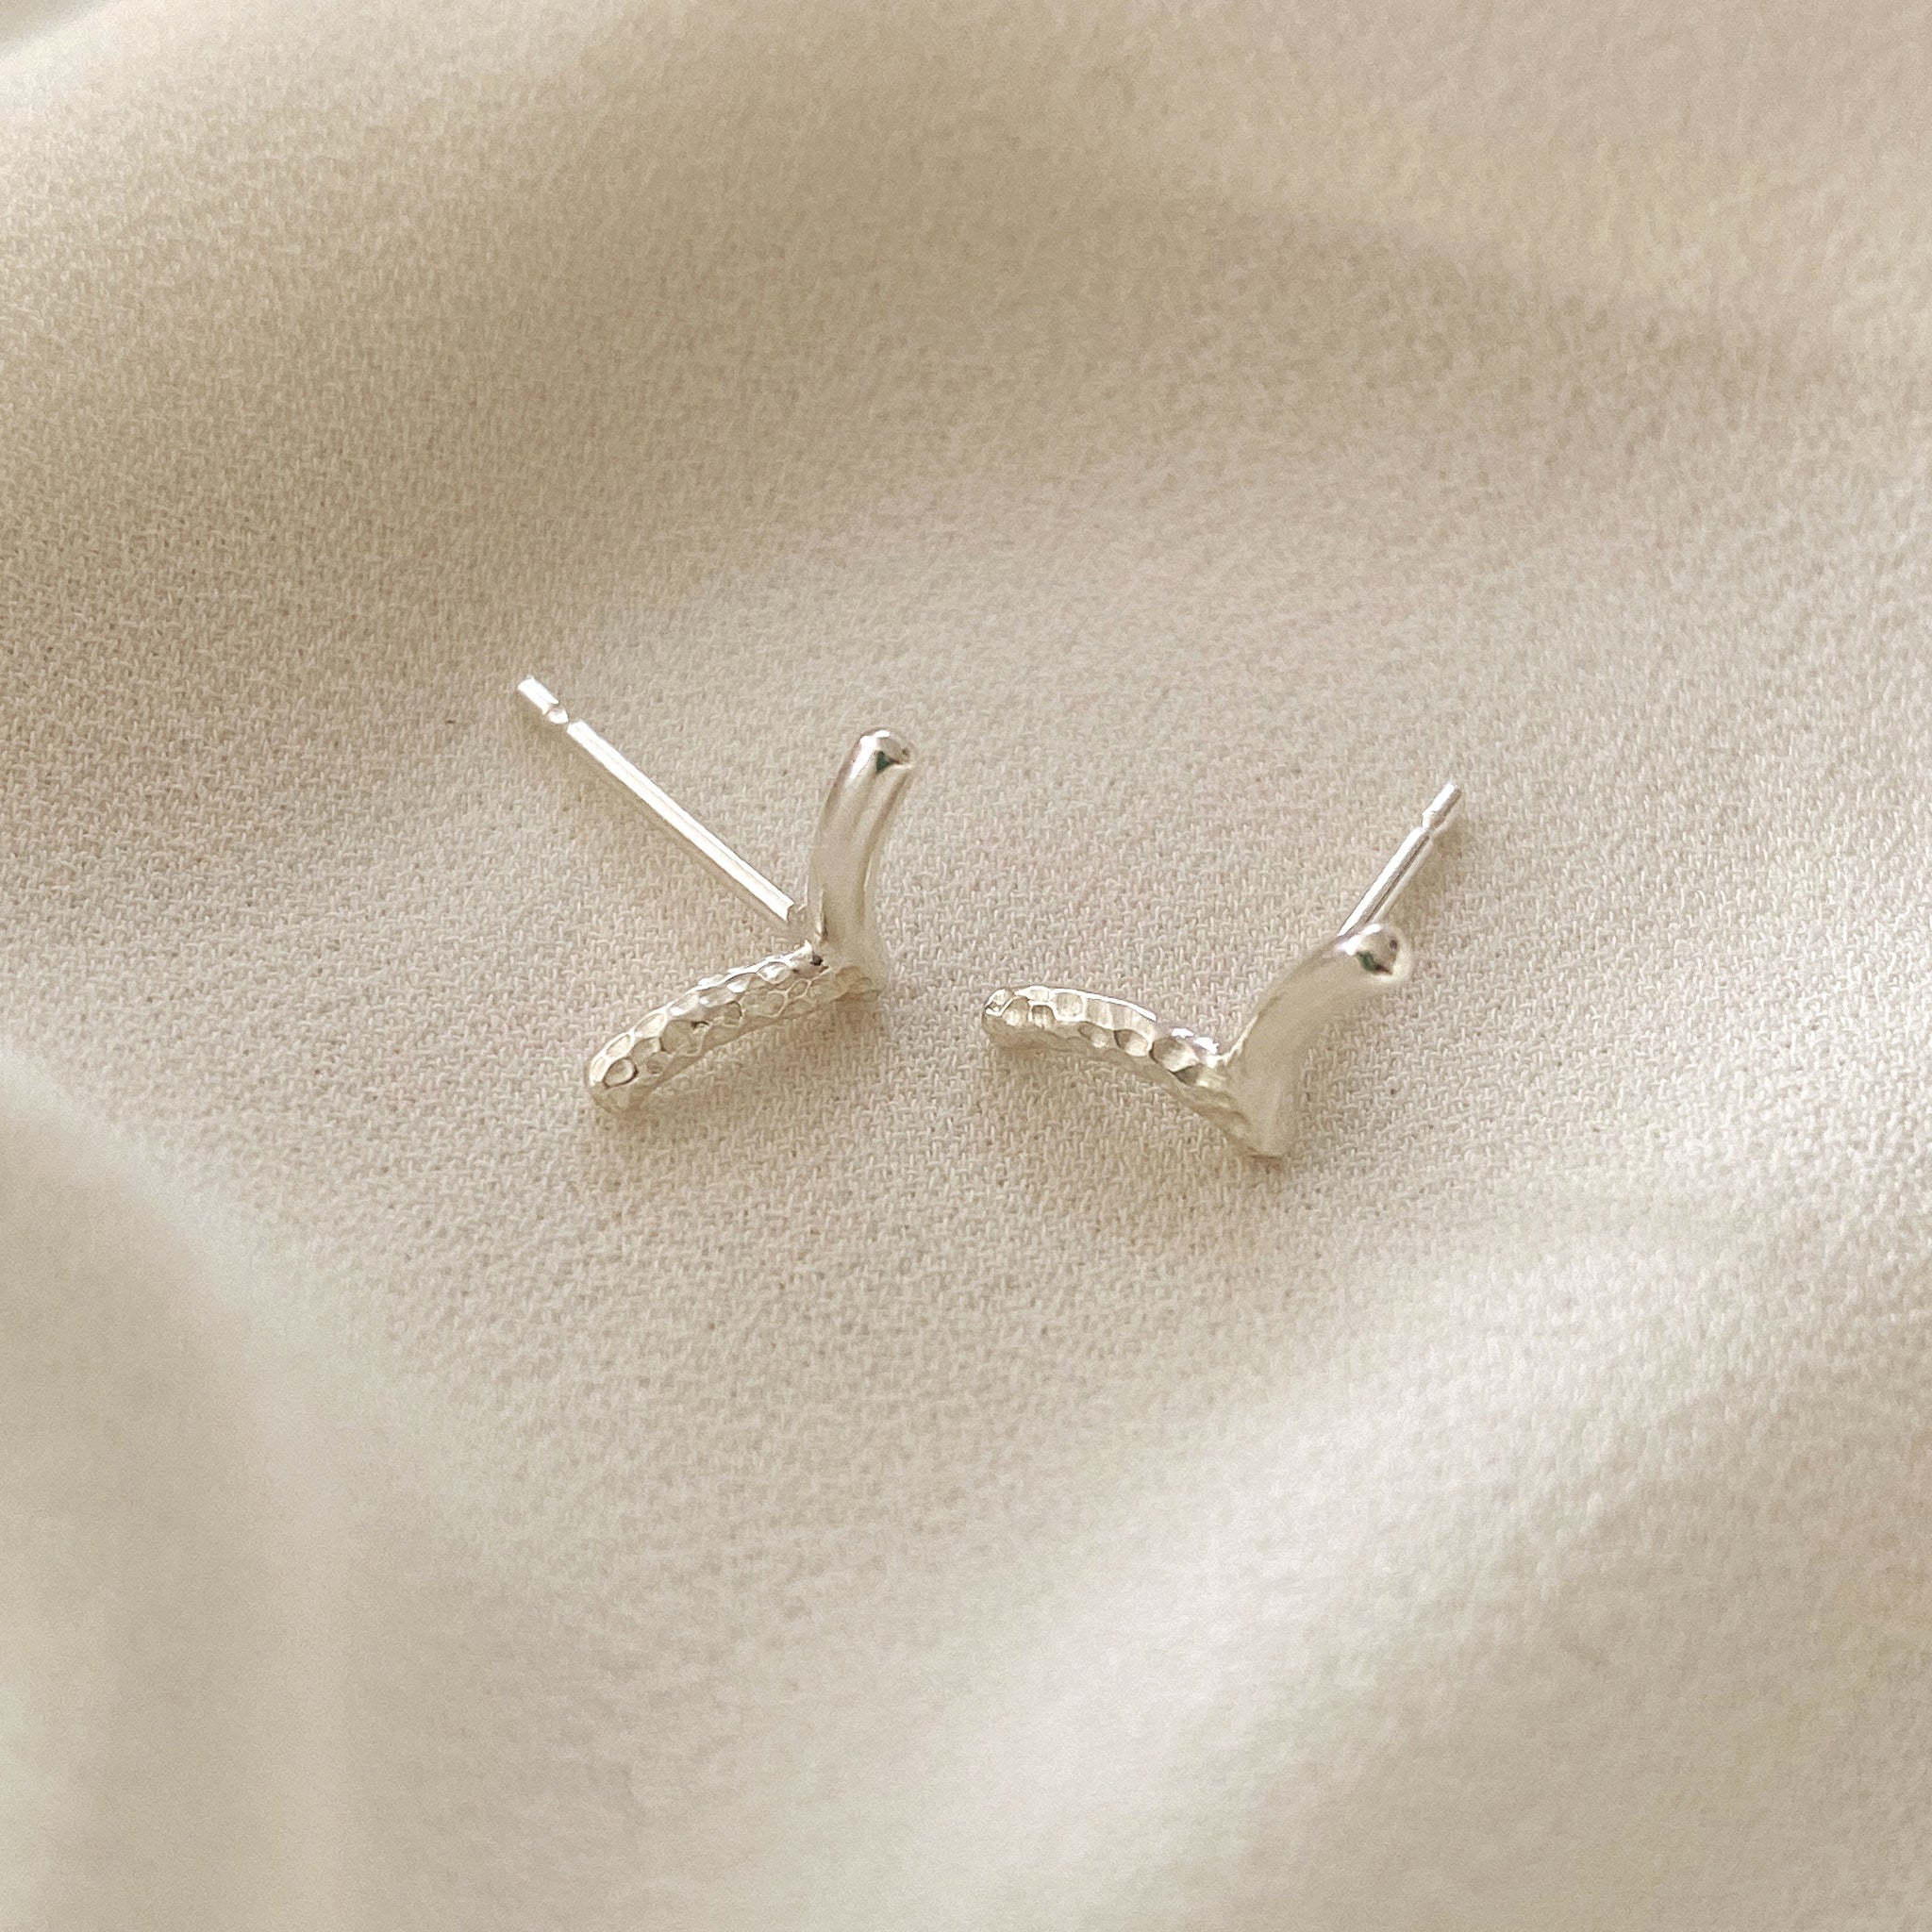 Silver wishbone flying birds earrings with texture